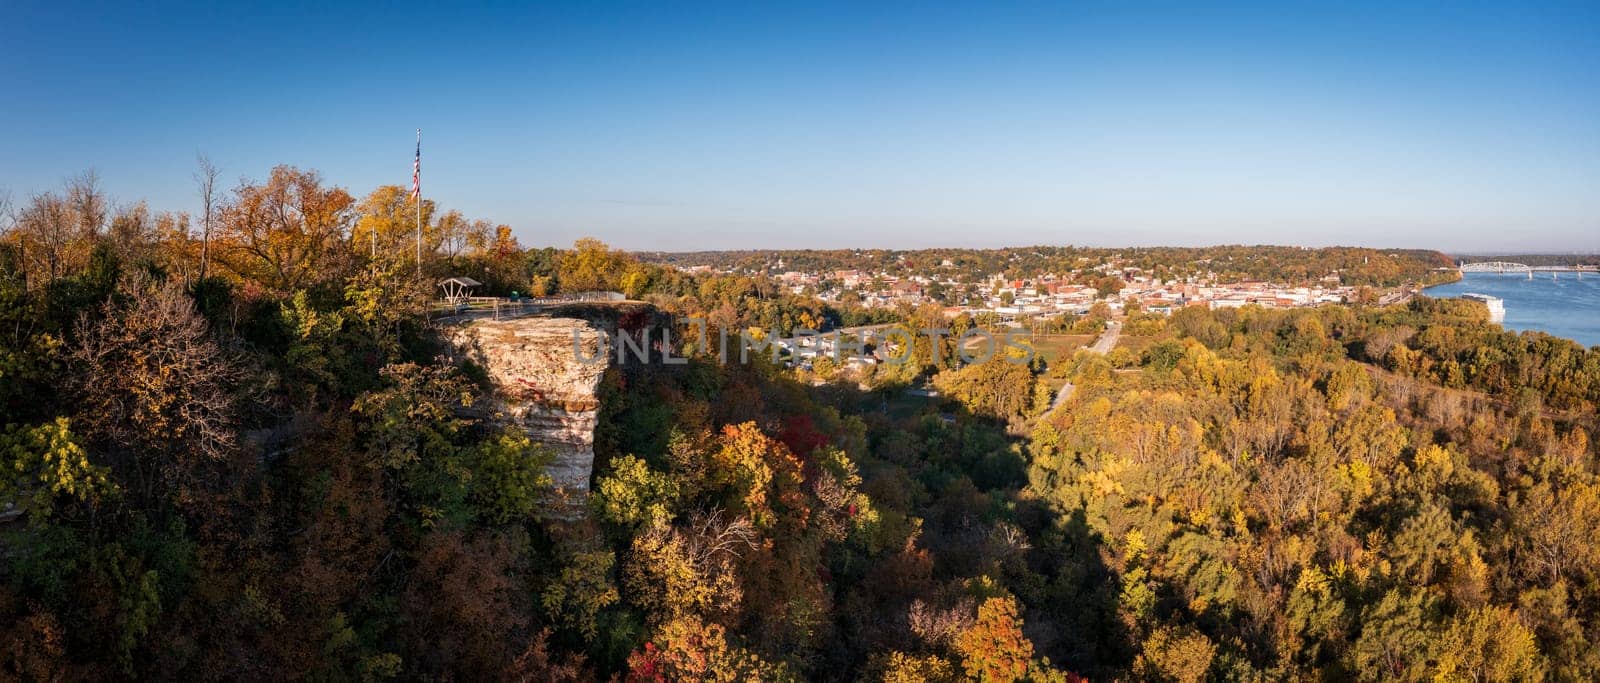 Lovers Leap overlook in Hannibal Missouri with townscape by steheap